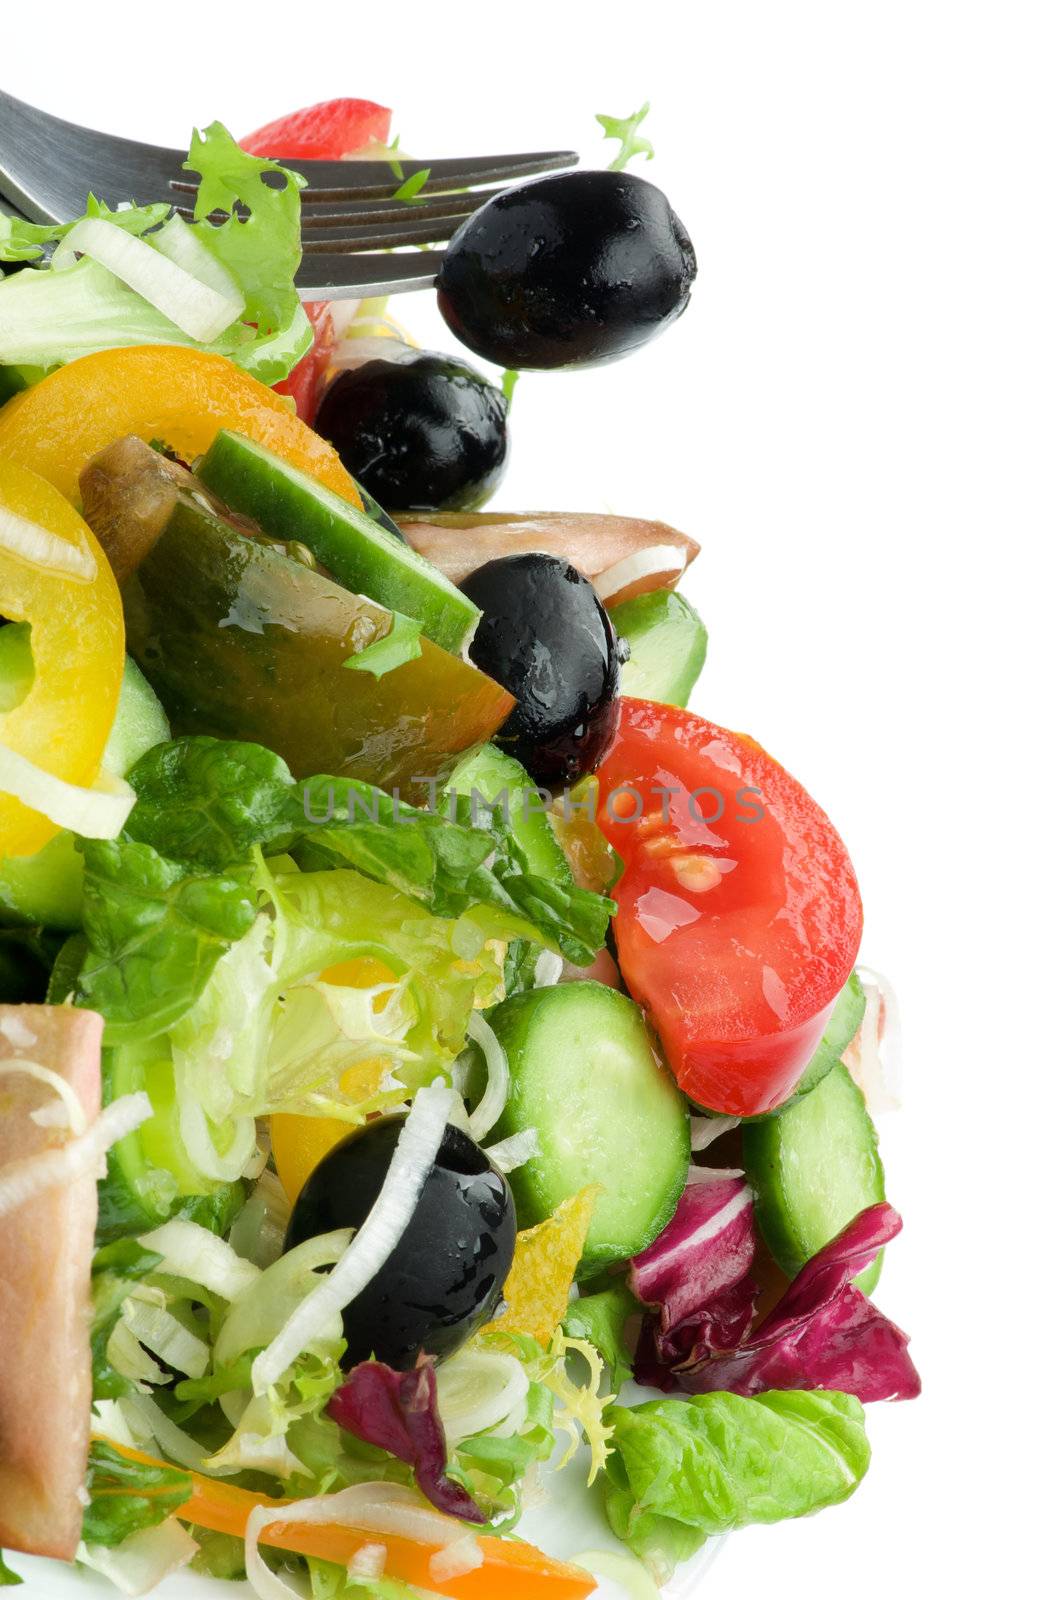 Vegetable Salad with Tomatoes, Yellow Bell Pepper, Leek, Cucumber, Lettuce, Olive Oil and Fork with Black Olive on White background